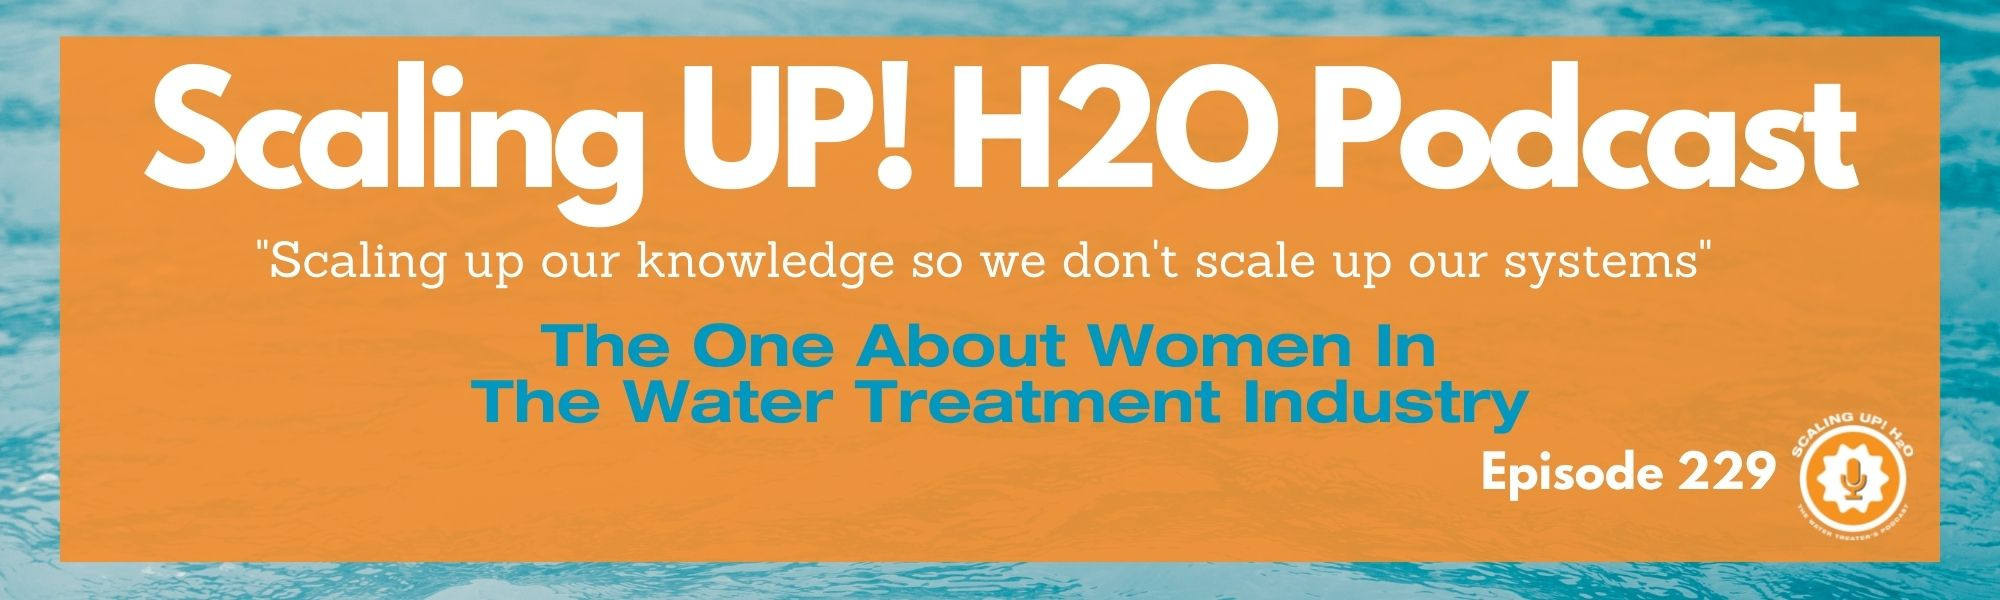 229 The One About Women In The Water Treatment Industry - Scaling UP! H2O